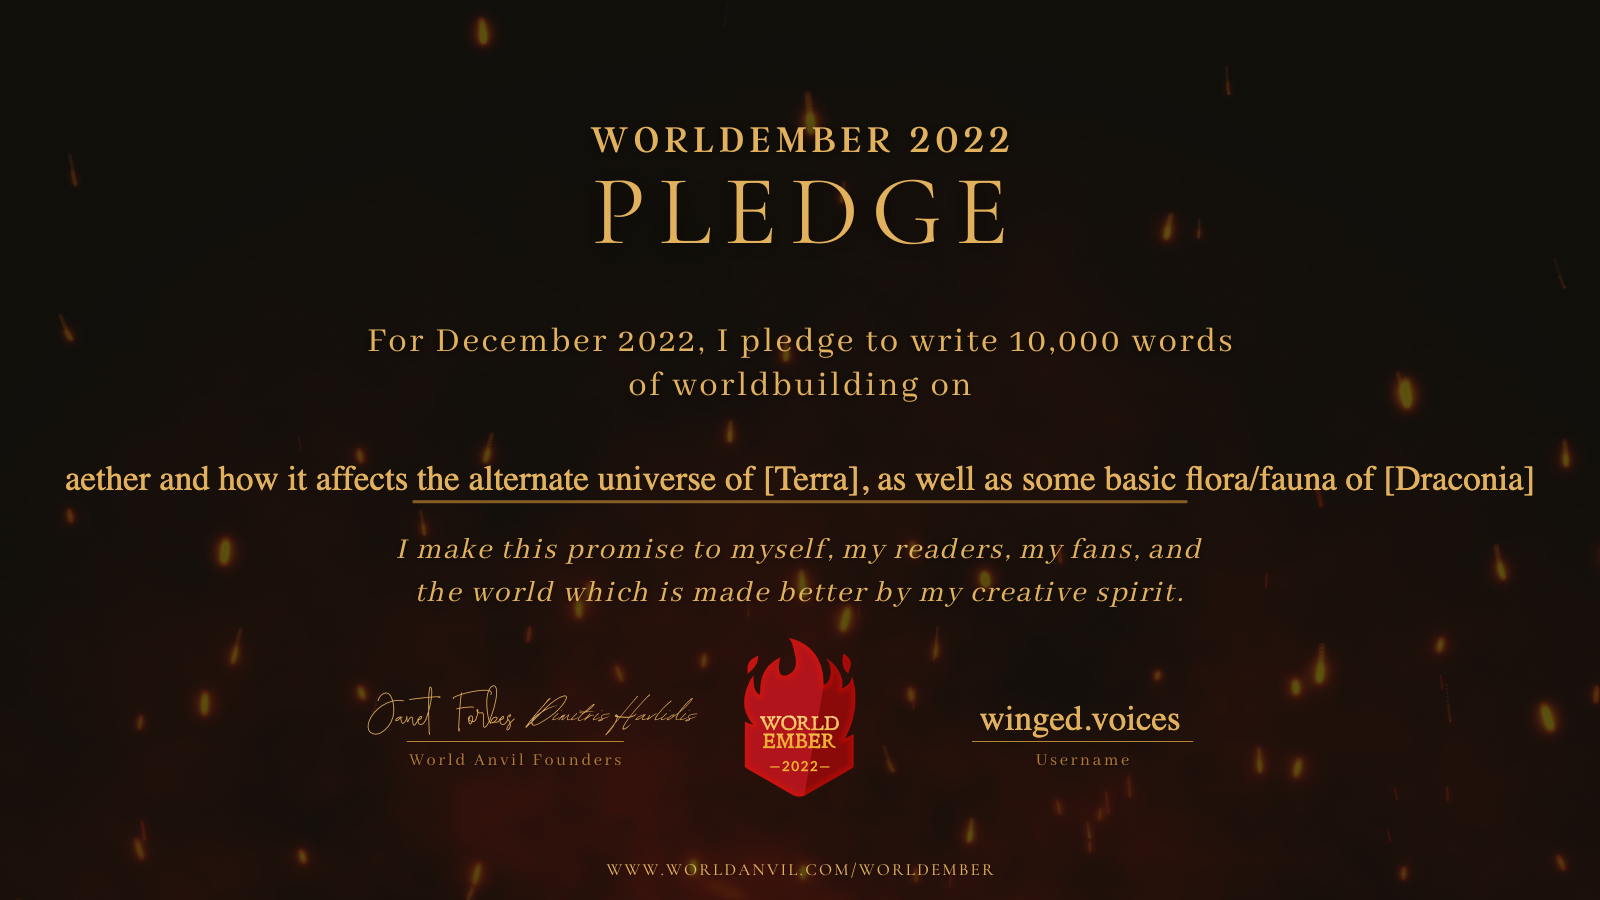 WorldEmber 2022 Pledge Document, stating that my pledge is "For December 2022, I pledge to write 10,000 words on 'aether and how it affects the alternate universe of Terra, as well as some basic flora/fauna of [Draconia]".